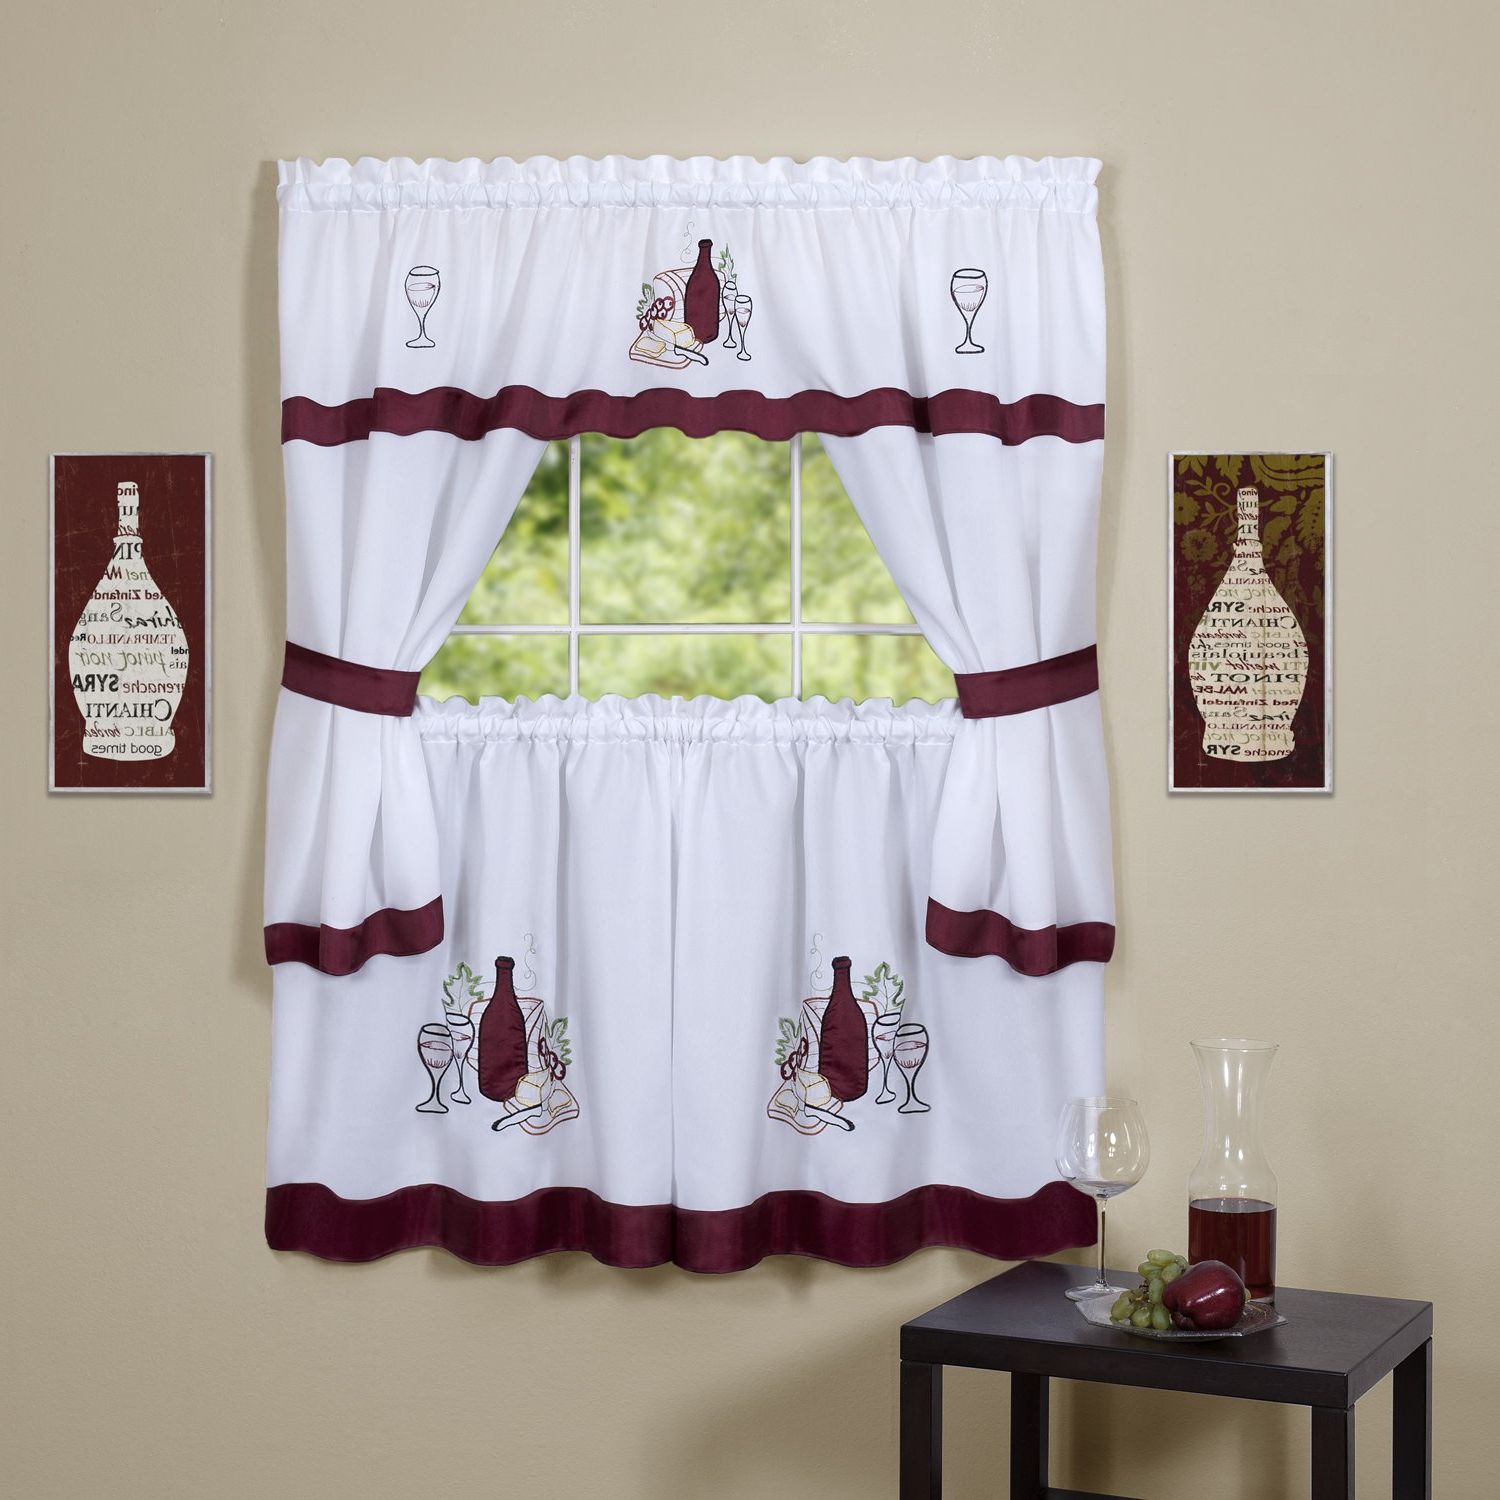 Favorite Achim Home Furnishings Cabernet Embellished Cottage Set With Tier Pair, 58 24", Burgundy Regarding Chateau Wines Cottage Kitchen Curtain Tier And Valance Sets (View 7 of 20)